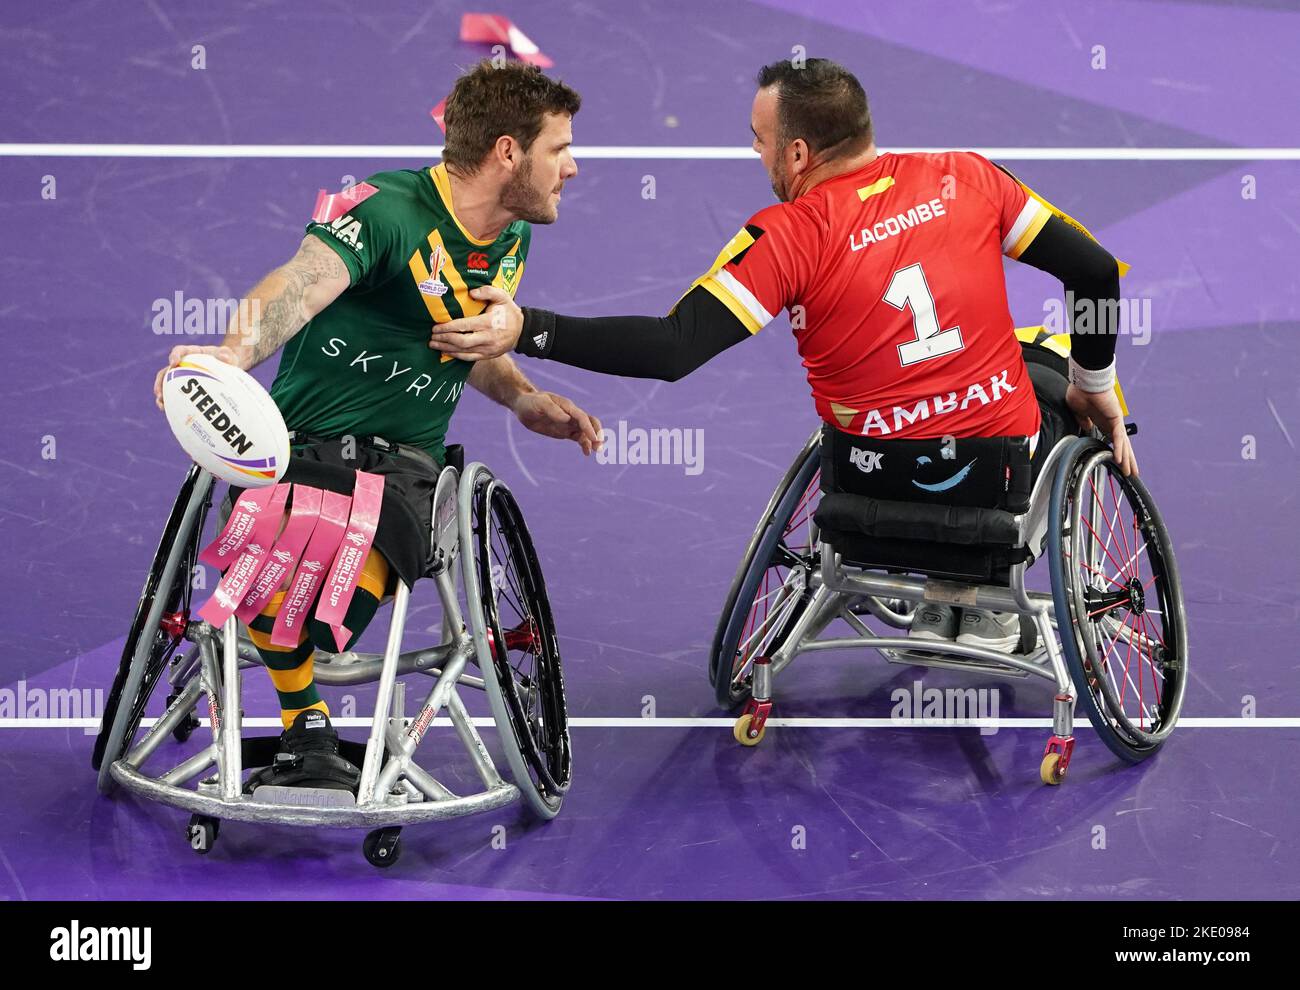 Australia's Adam Tannock is tackled by Spain's Joel Lacombe during the Wheelchair Rugby League World Cup group A match at the Copper Box Arena, London. Picture date: Wednesday November 9, 2022. Stock Photo